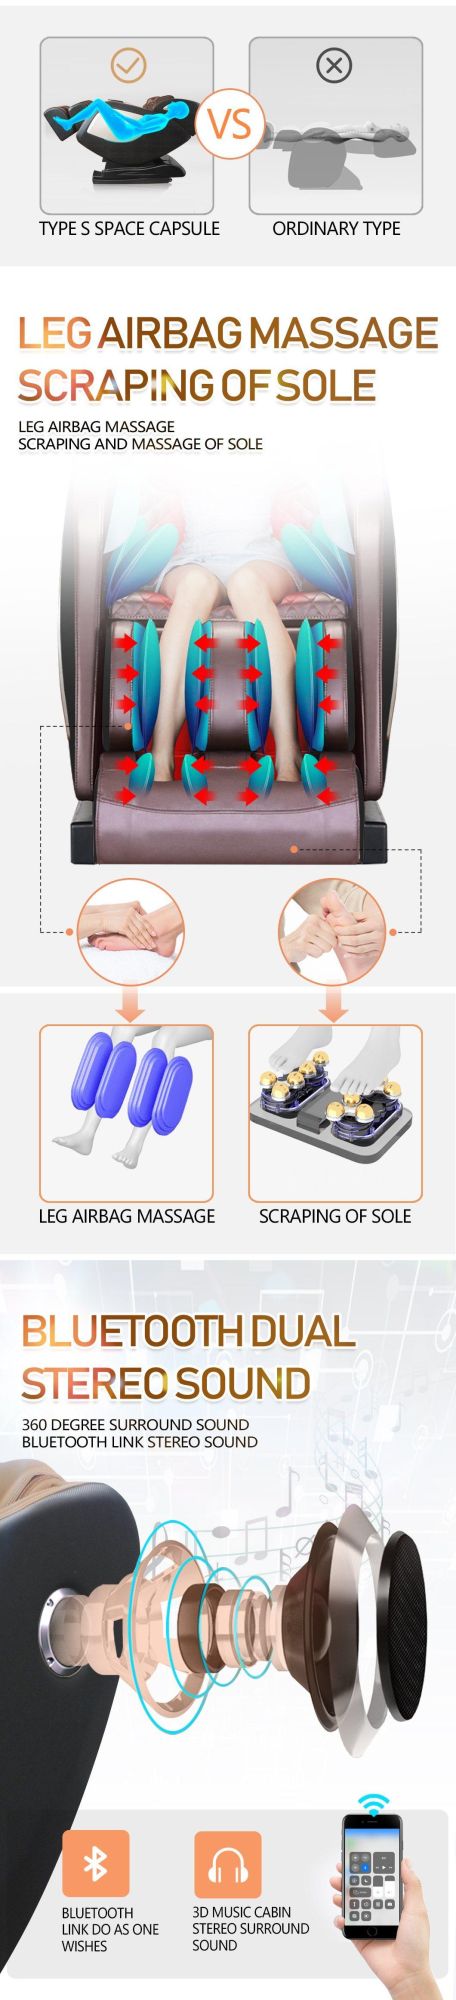 Latest Design 3D Zero Gravity Bluetooth Music Relaxing Foot Roller Massage Chair for Health Care